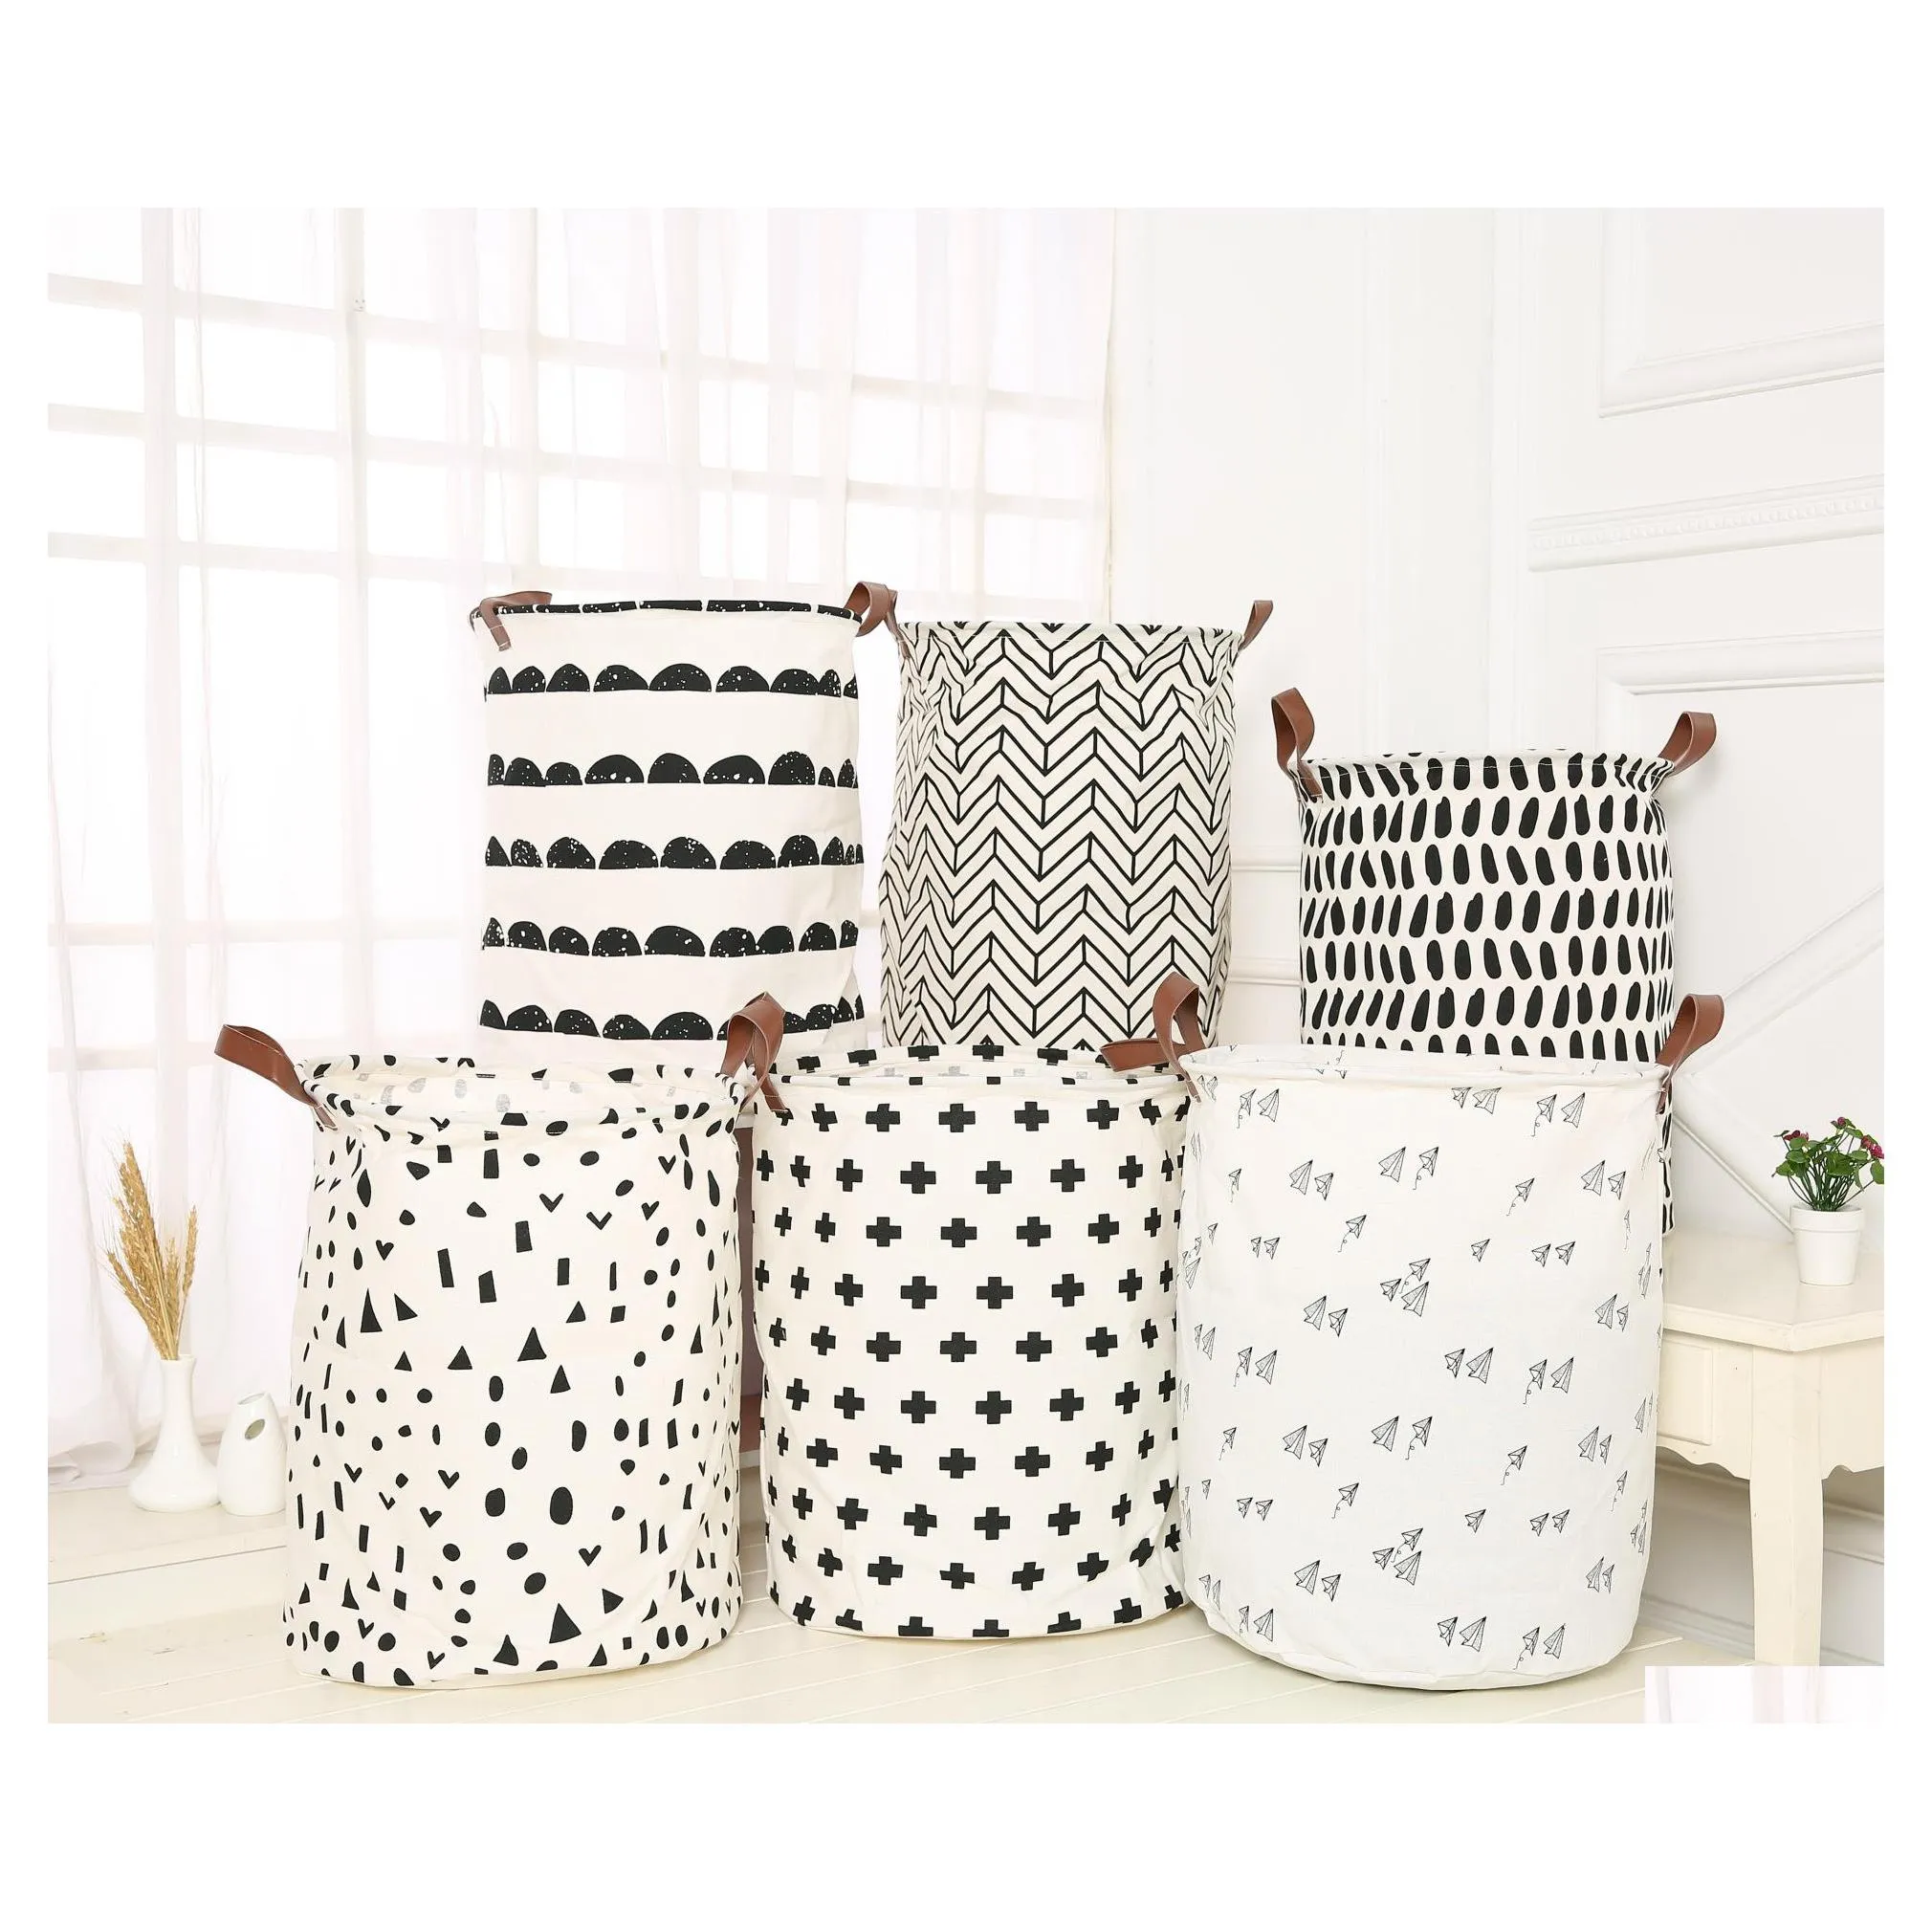 Storage Baskets Storage Baskets Bins Kids Room Toys Bags Bucket Clothing Organizer Laundry Bag Canvas Polka Dot 55 Styles Drop Deliv Dhis7